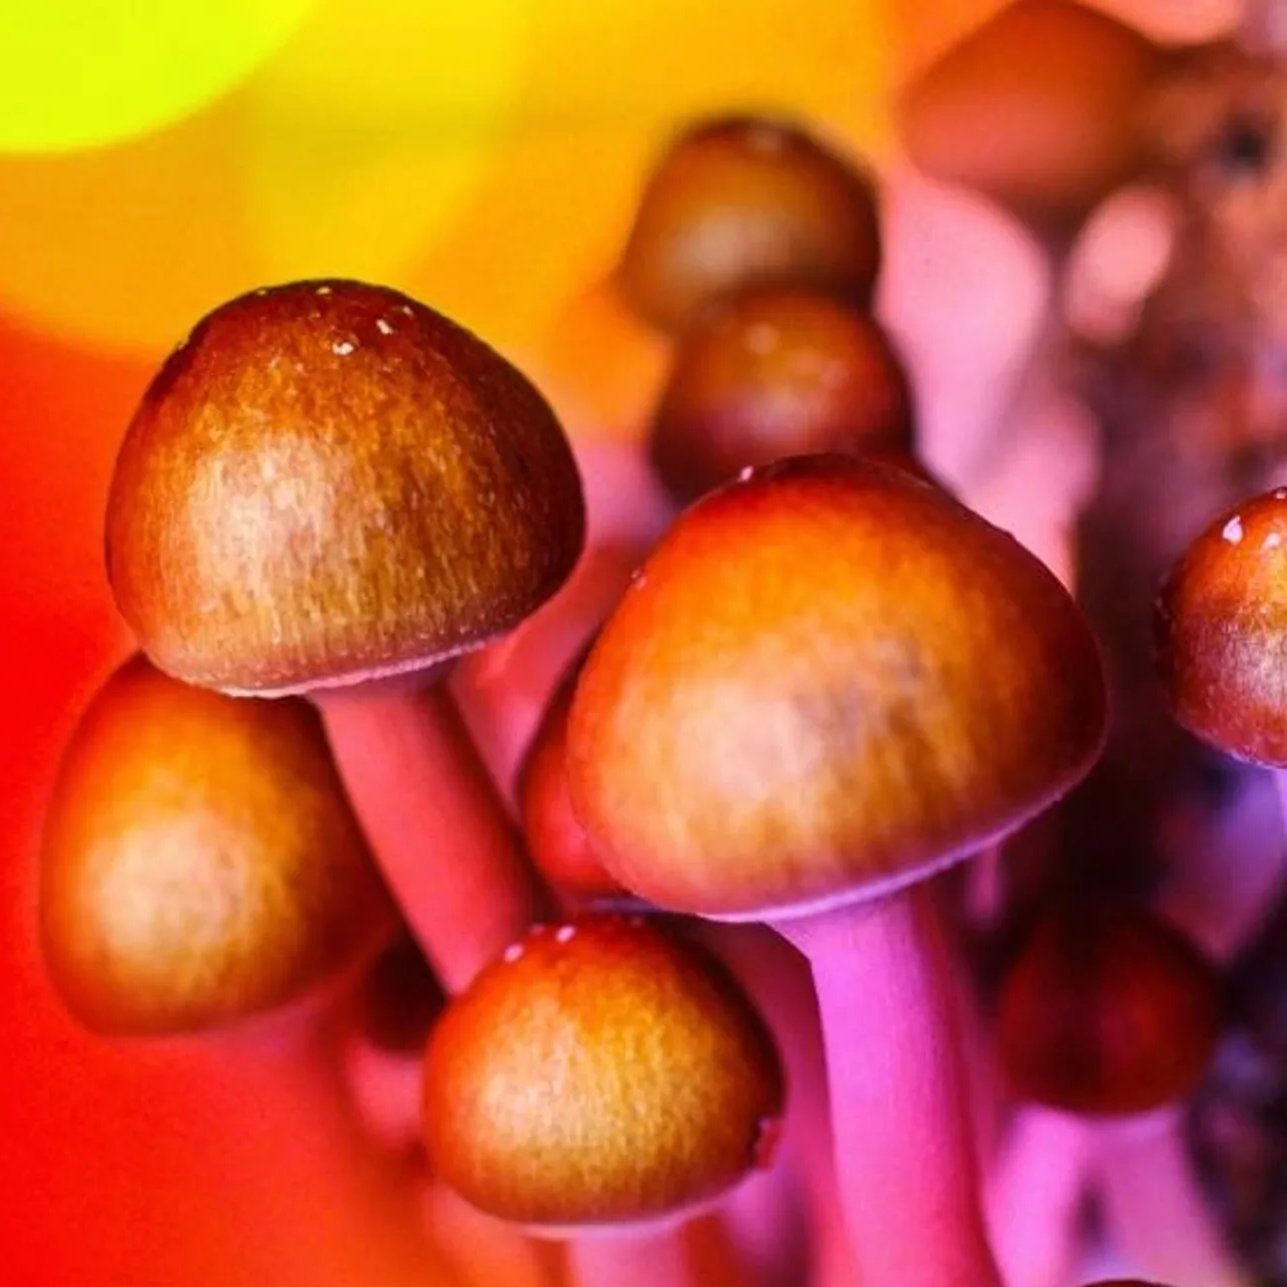 Now Teaching Magic Mushroom Cultivation Seminars in Denver, Colorado
Contact Us Today For More Info - Join Us To Excercise Your 1st Ammendment Rights